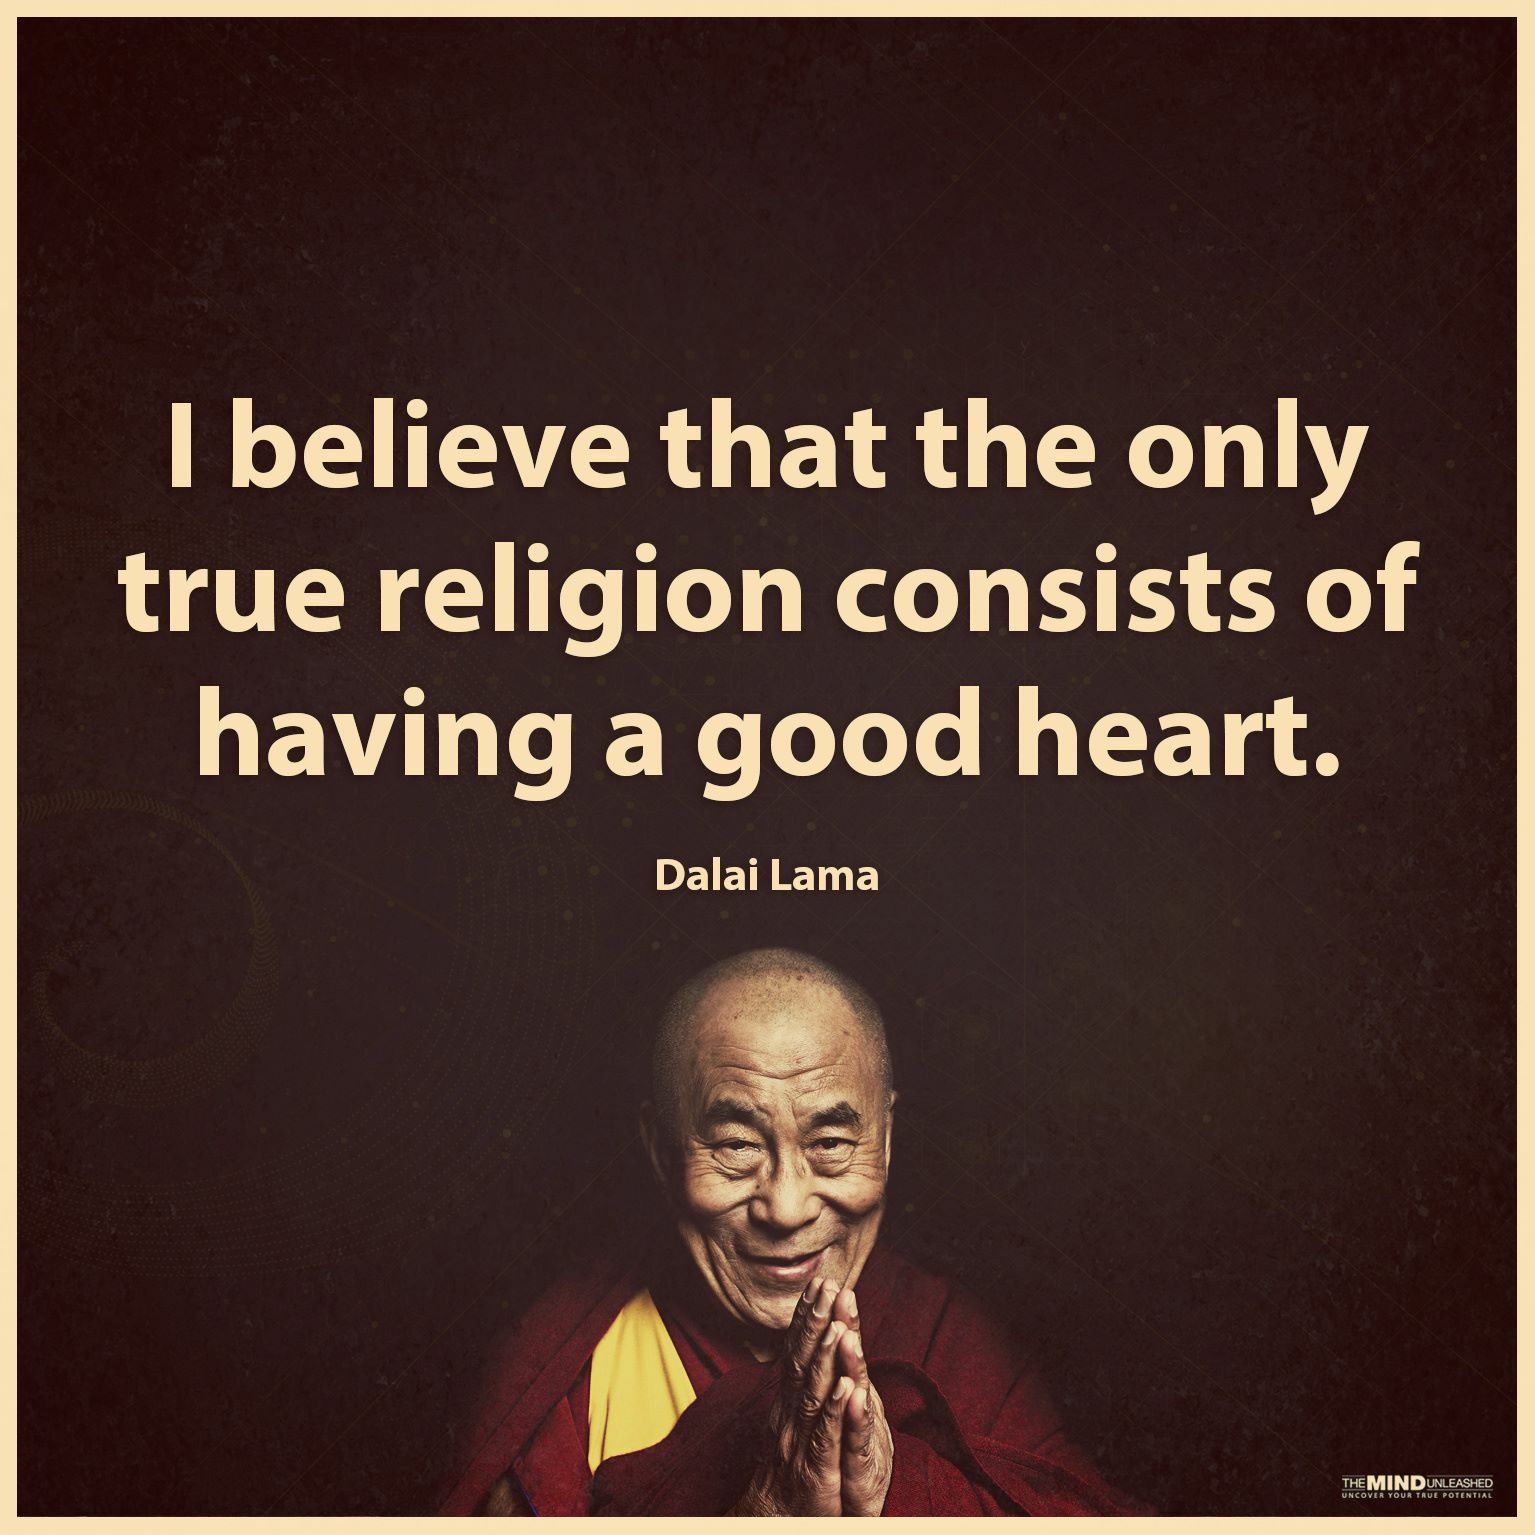 i believe that the only true religion consists of having a good heart. dalai lama